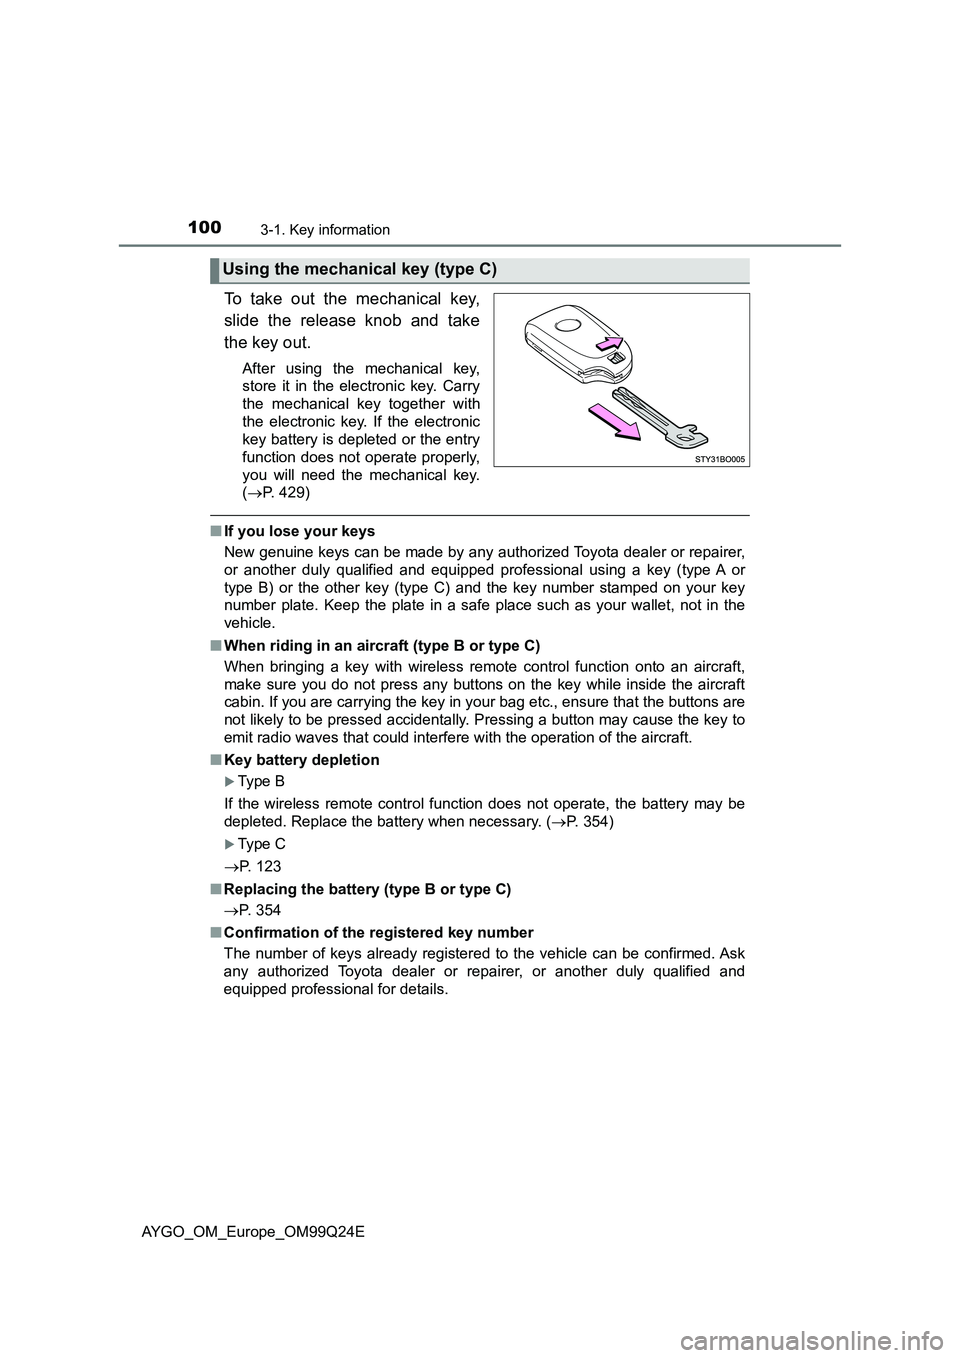 TOYOTA AYGO 2017  Owners Manual (in English) 1003-1. Key information
AYGO_OM_Europe_OM99Q24E
To take out the mechanical key, 
slide the release knob and take 
the key out.
After using the mechanical key, 
store it in the electronic key. Carry 
t